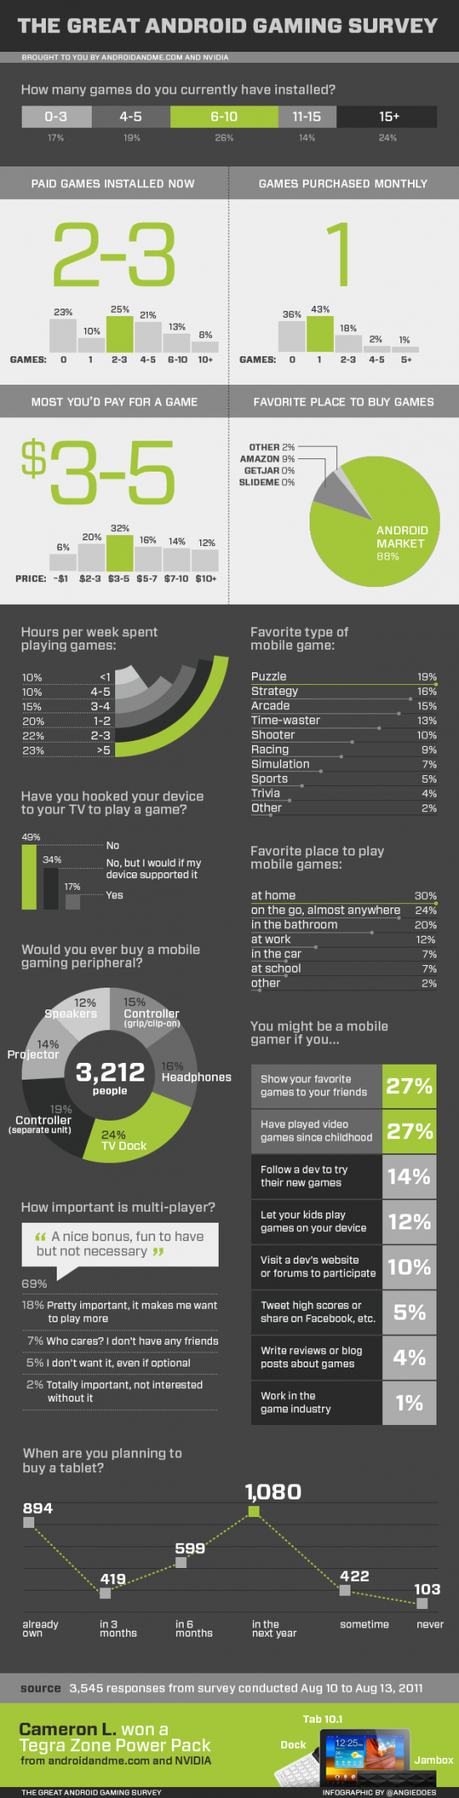 http://cdn.androidtapp.com/wp-content/uploads/2011/08/the-great-android-gaming-survey-infographic-e1313668840452.png